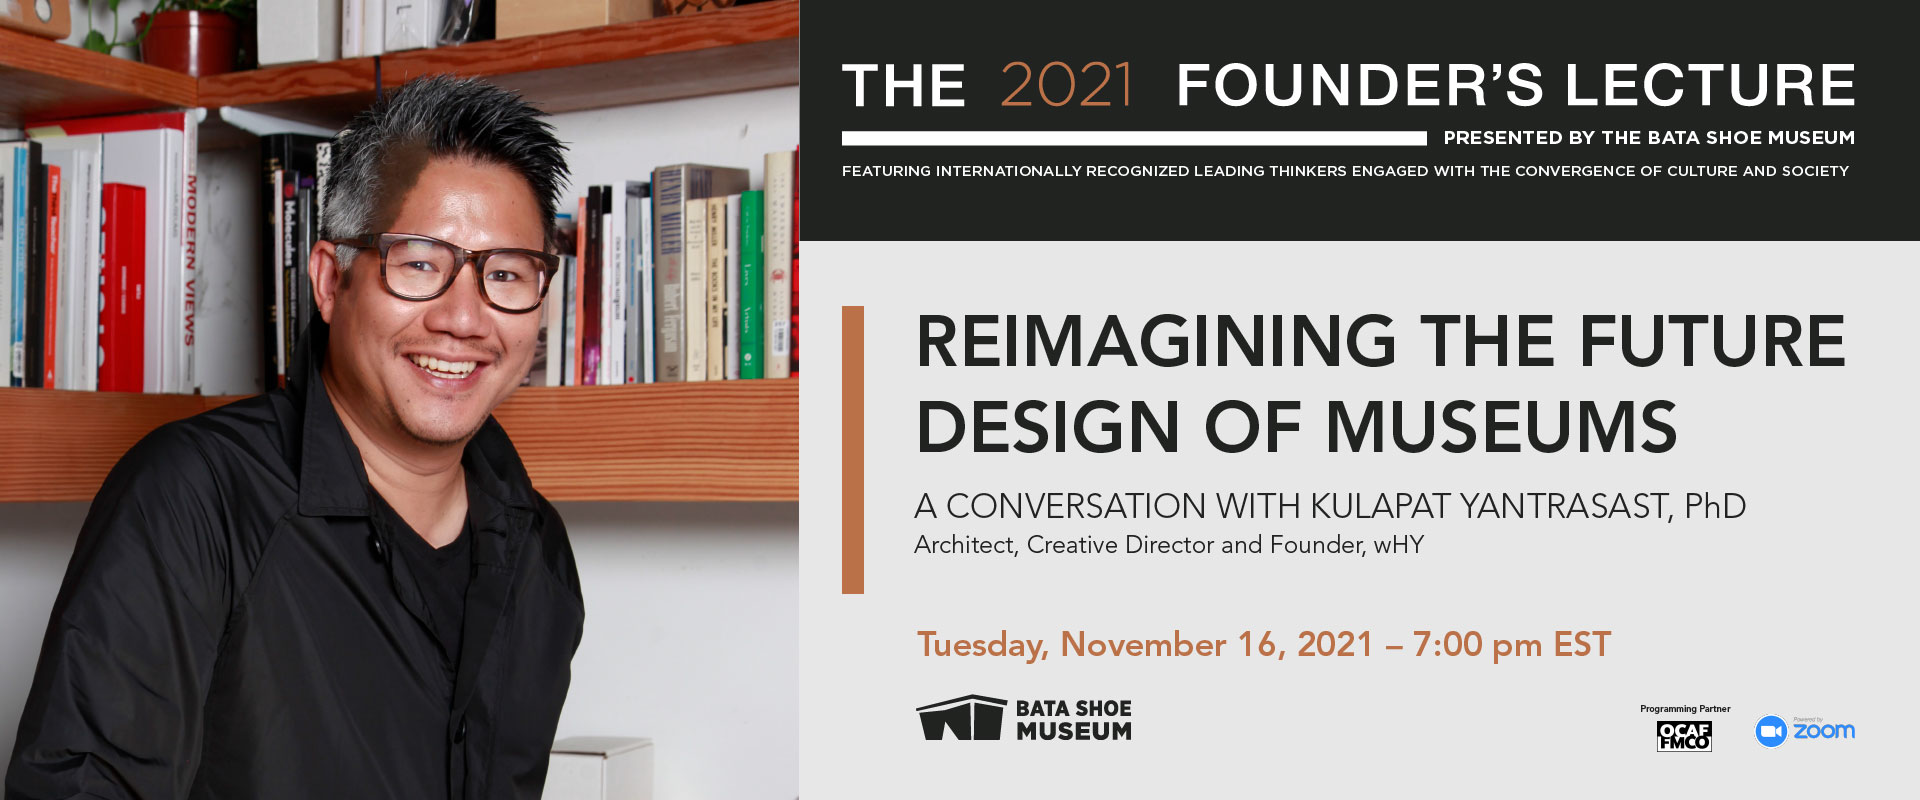 Reimagining the Future Design of Museums: A Conversation with Kulapat Yantrasast, PhD, Architect, Creative Director and Founder, WHY